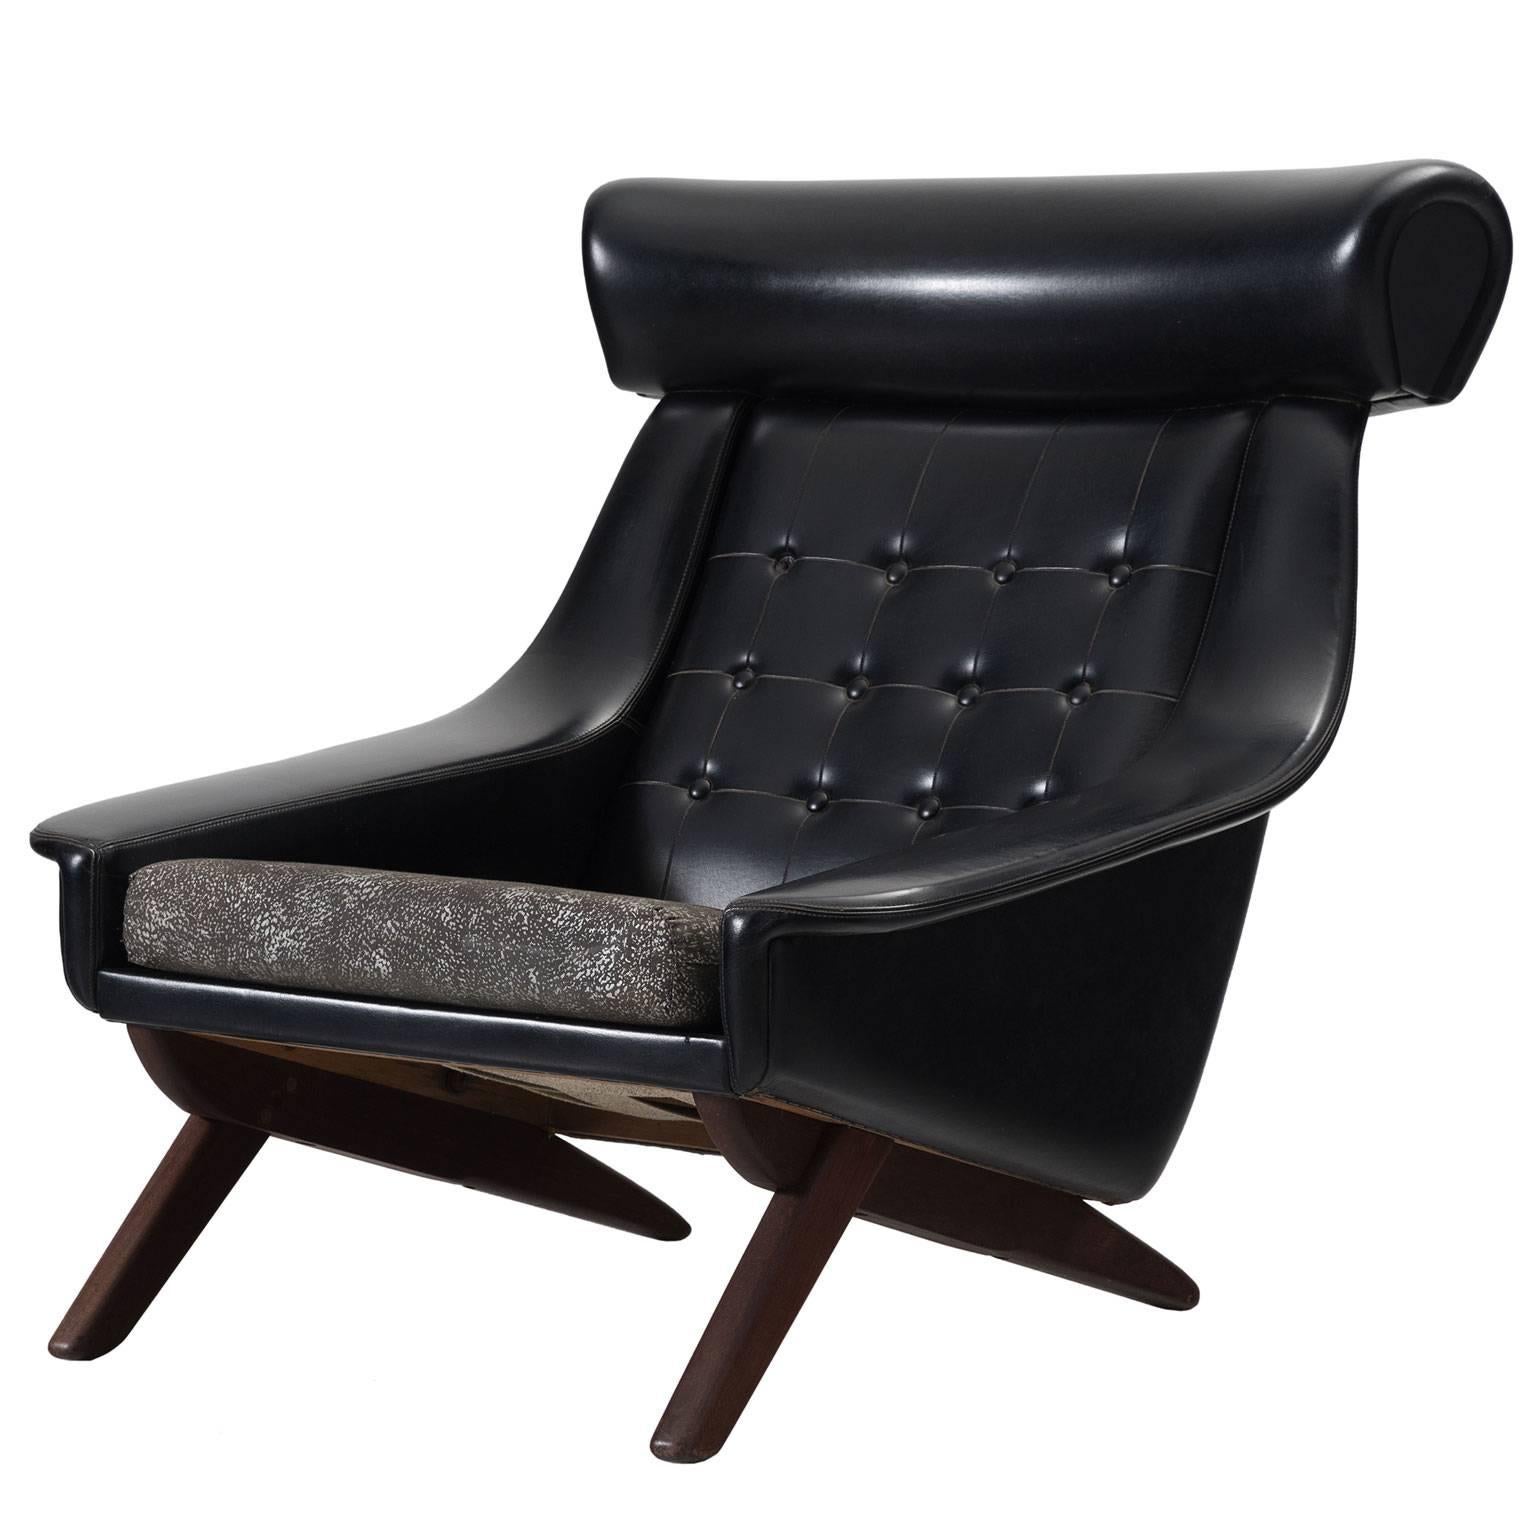 Danish Mid-Century Lounge Chair in Black Upholstery